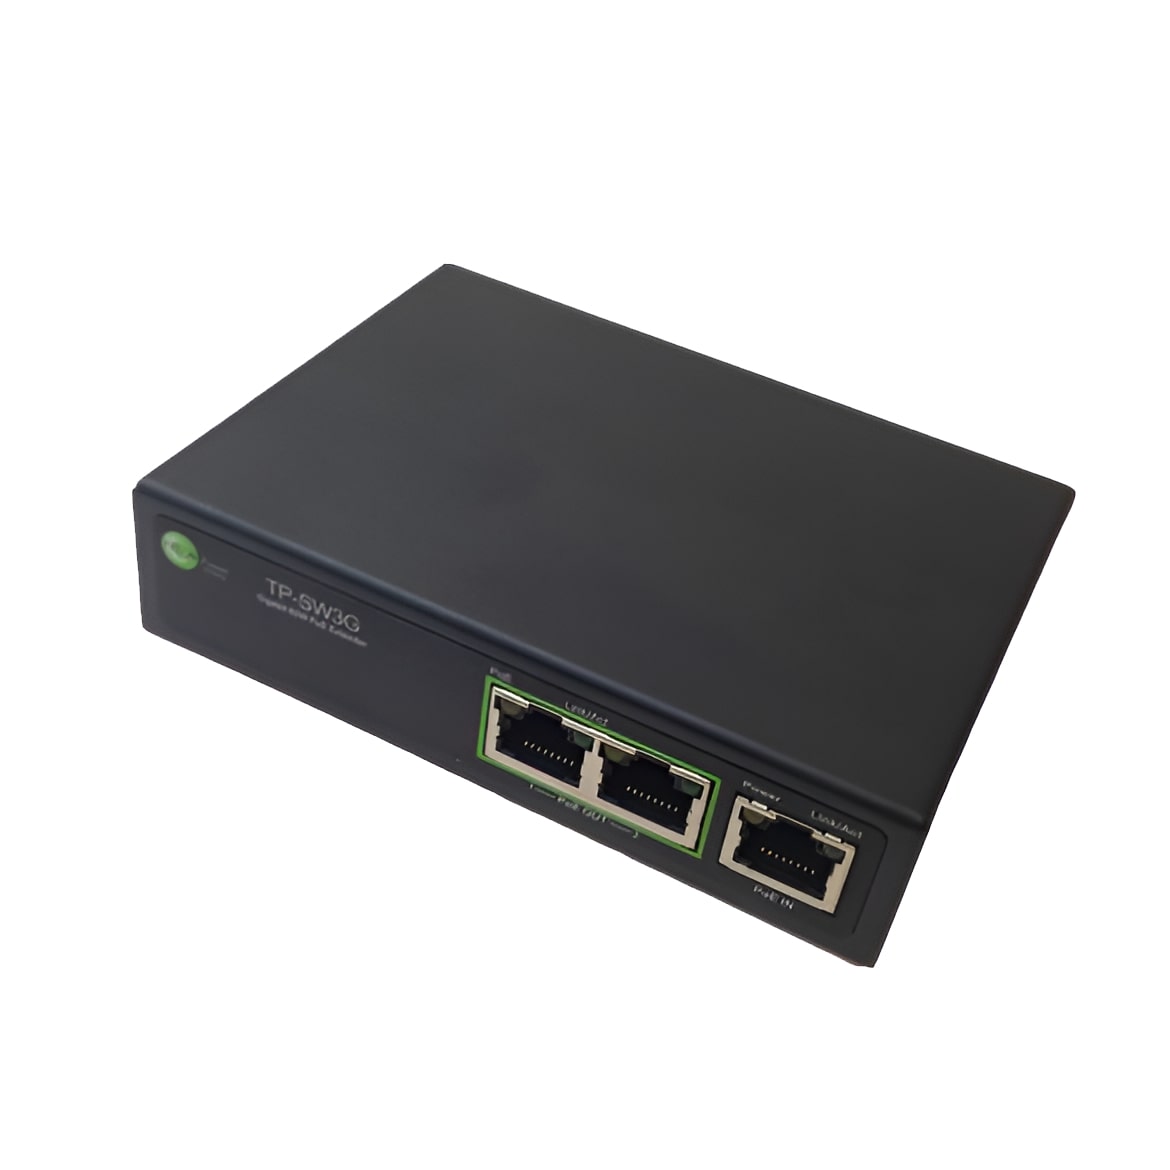 Ubiquiti Tycon Power 3 Port 60W Gigabit PoE Extender. IEEE802.3af/at, it accepts 60W (or passive POE) and provides 2x 30w on each port!